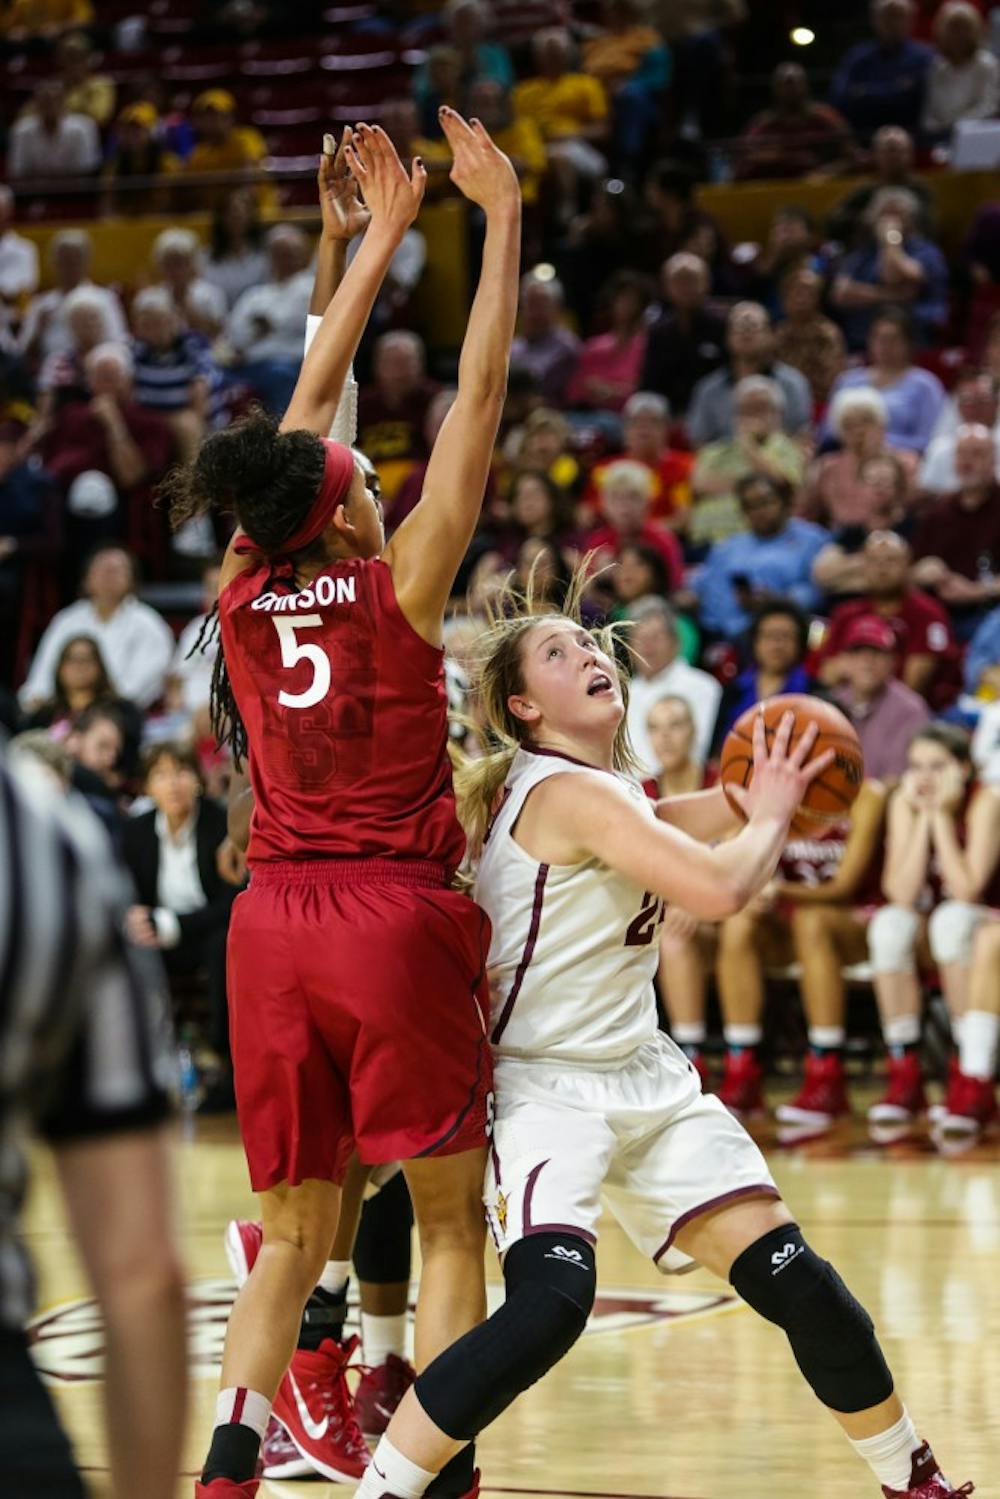 ASU sophomore forward Kelsey Moos looks for a shot as Stanford freshman forward Kaylee Johnson closes during the ASU vs. Stanford women’s basketball game on Feb. 6, 2015, at the Wells Fargo Arena. (Daniel Kwon/The State Press)